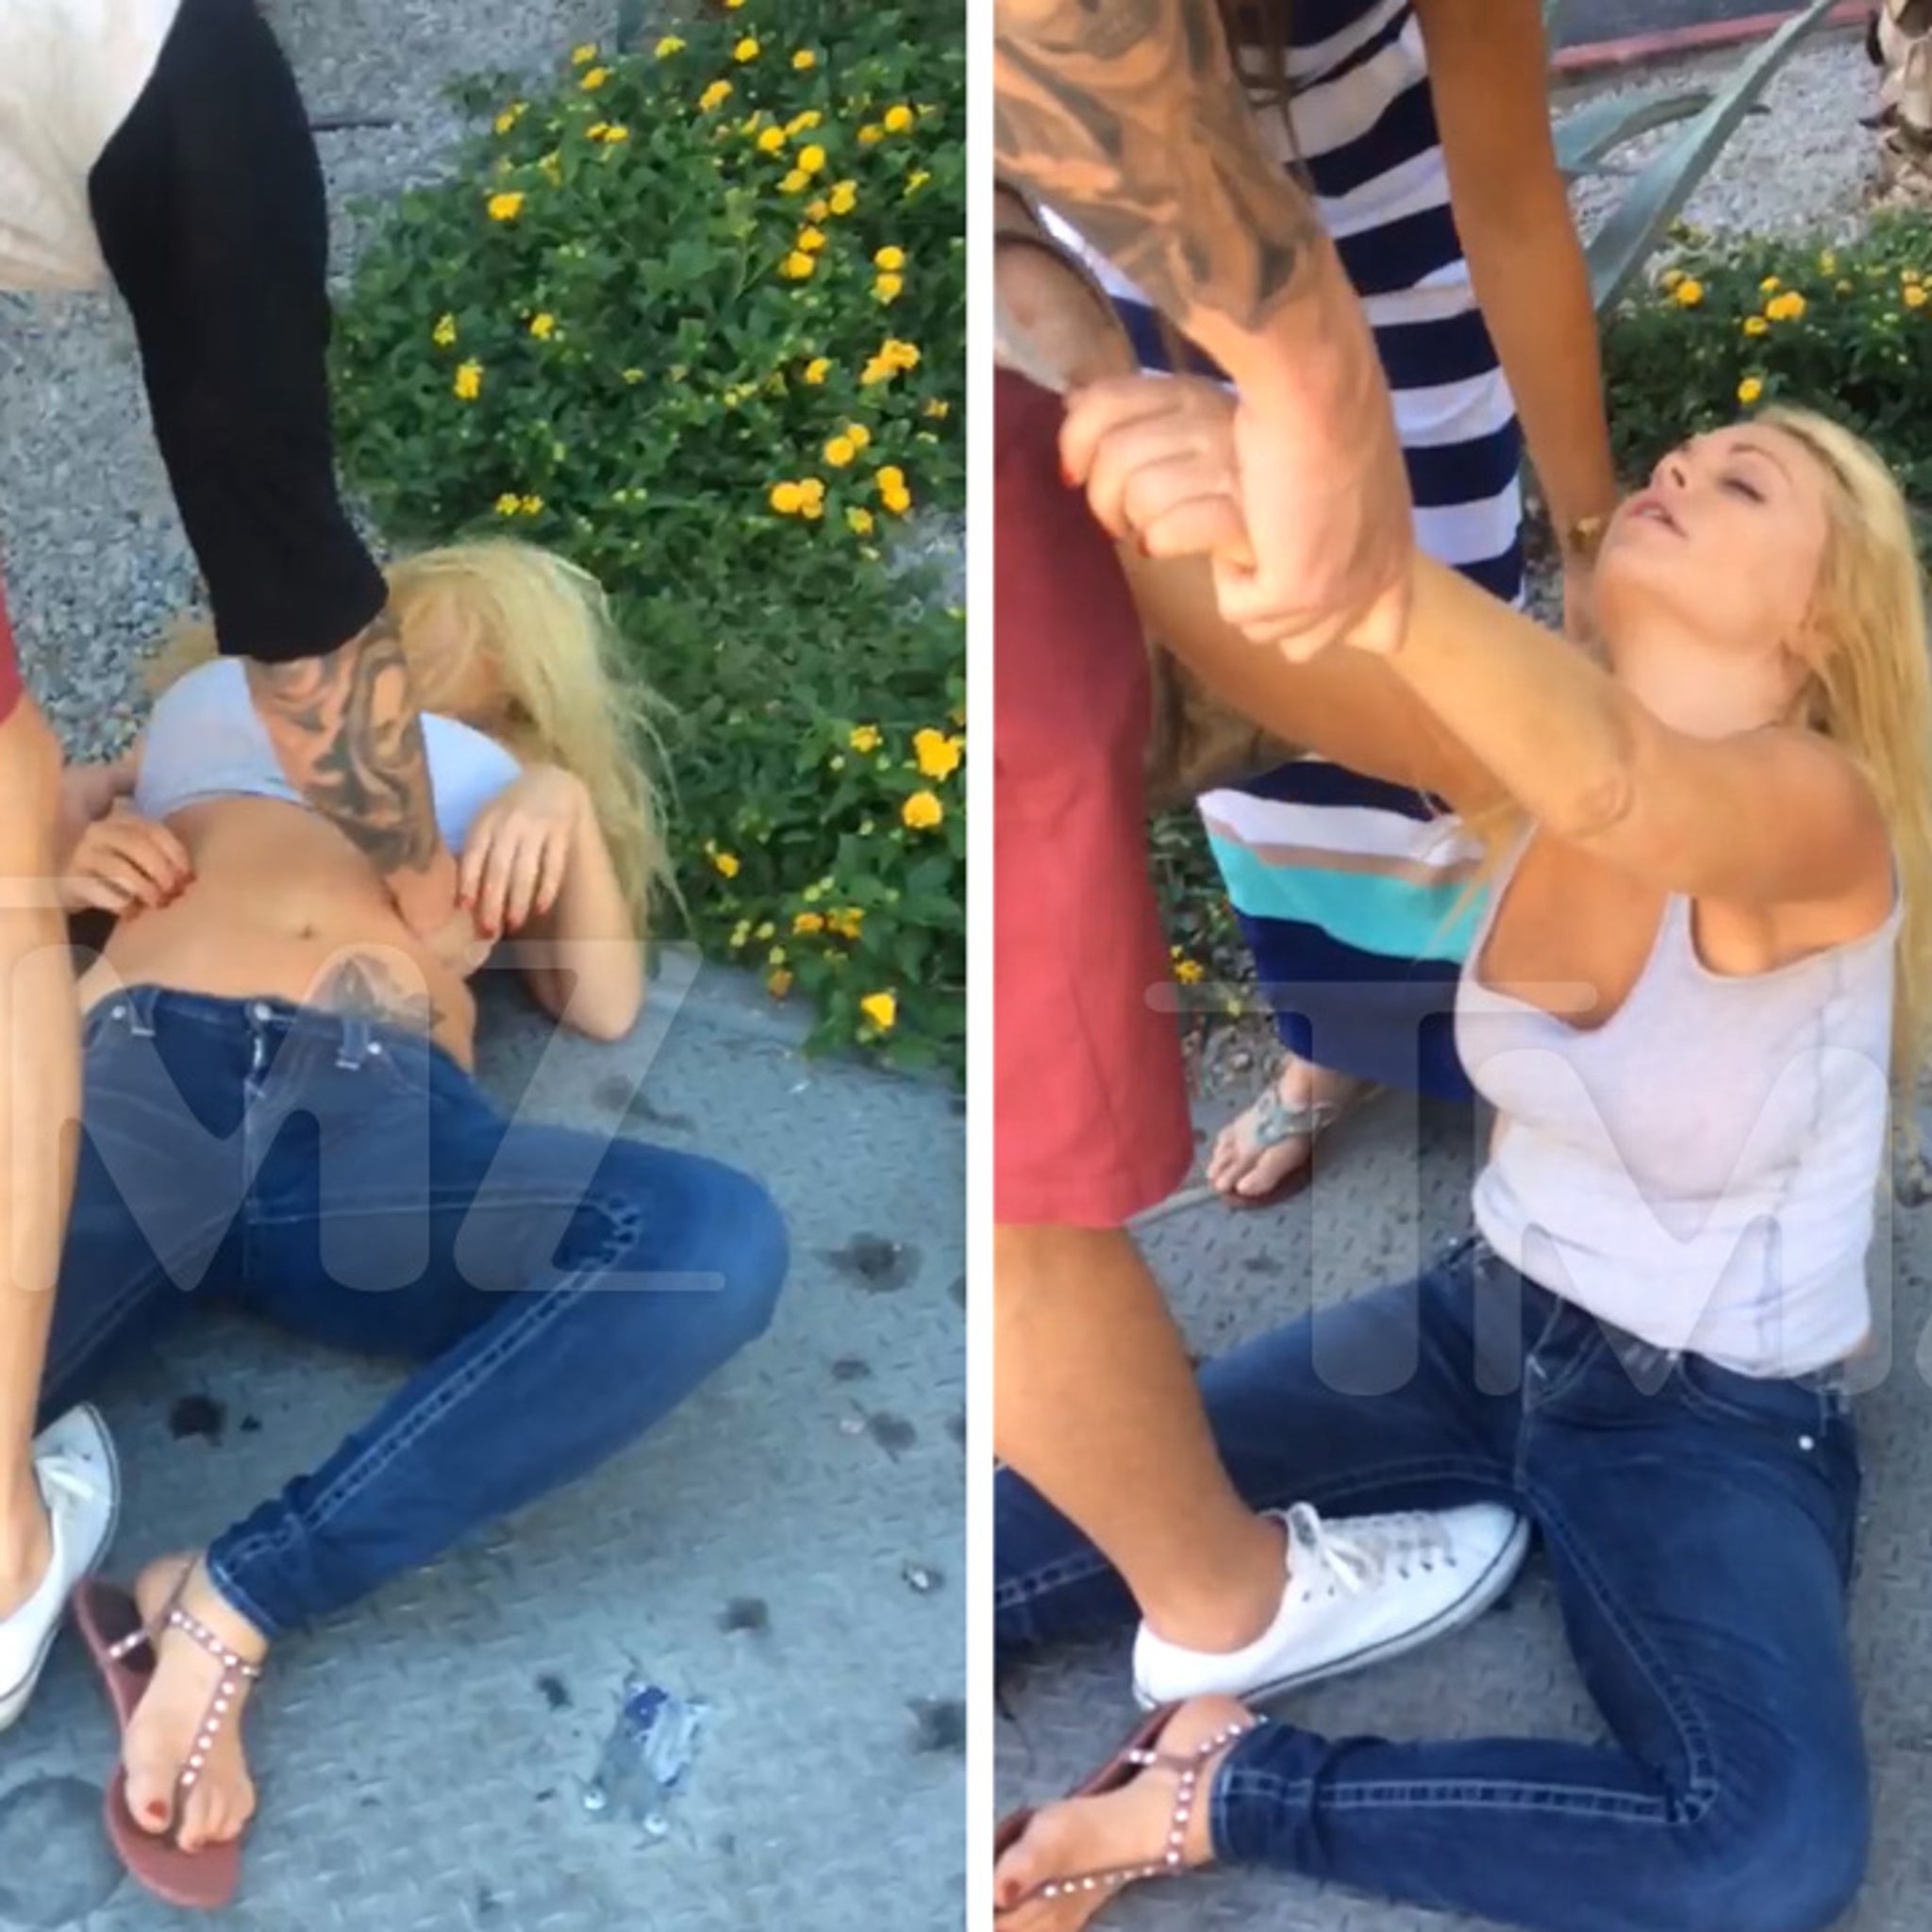 Passed Out Drunk - Porn Star Jesse Jane -- Passed OUT COLD On the Vegas Strip! (VIDEO)